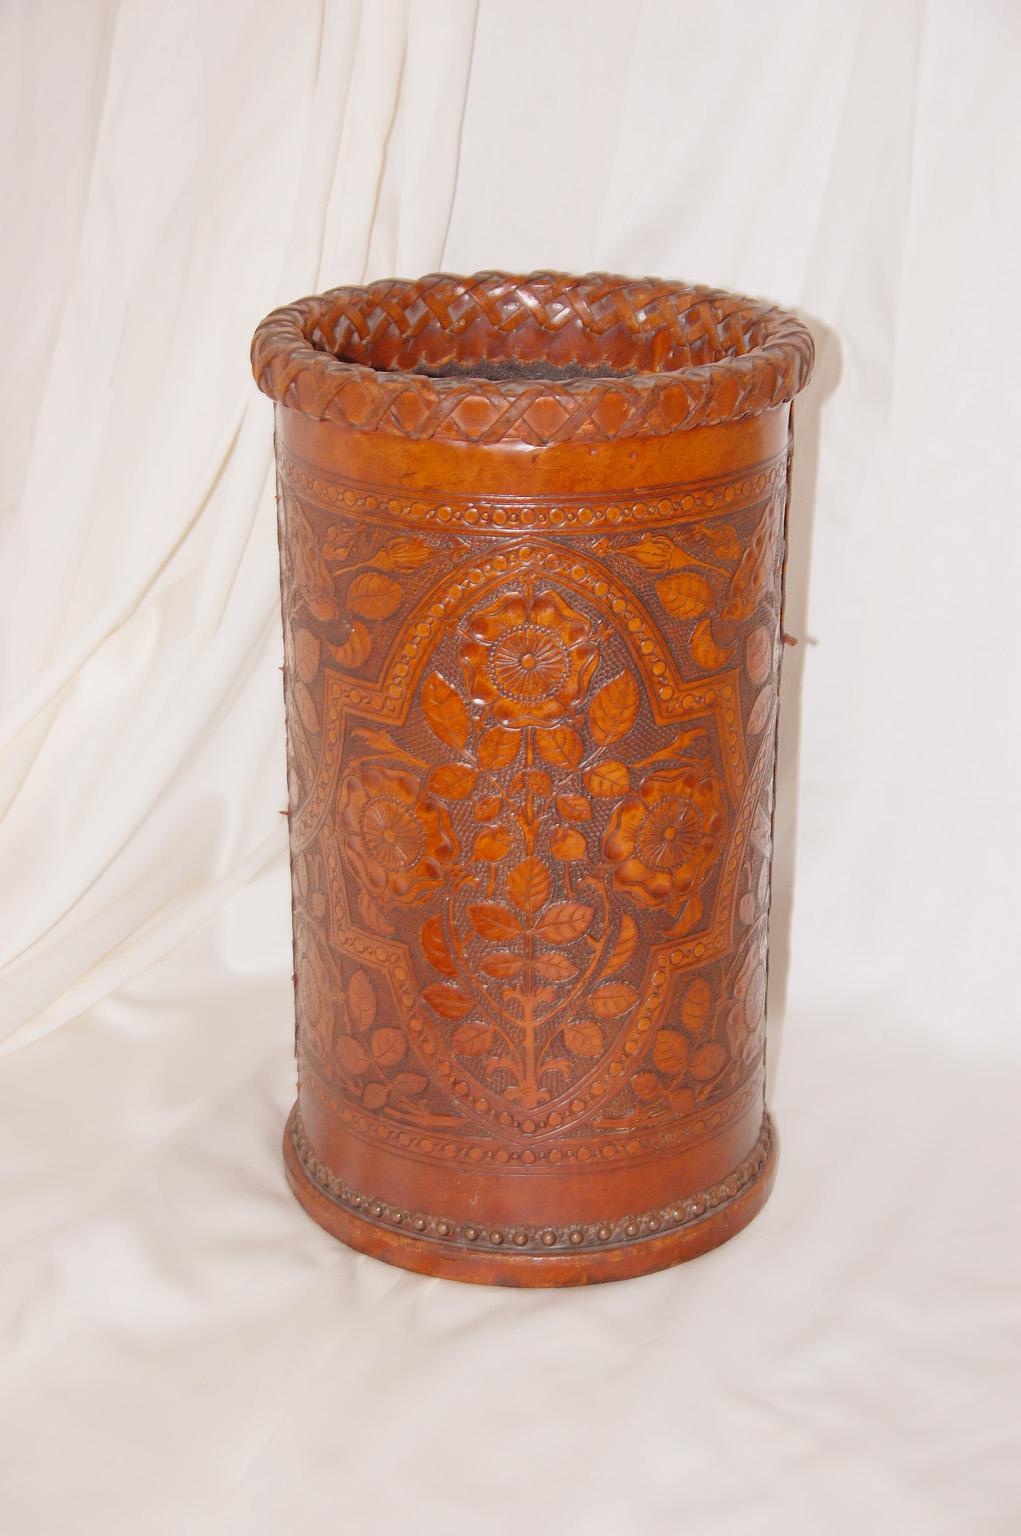 English Arts & Crafts hand embossed leather (cowhide) waste basket or stickstand. The elegant leather hand tooling has a floral motif within curving borders. The base has brass tacks, the upper rim is woven leather and the side seams are braided